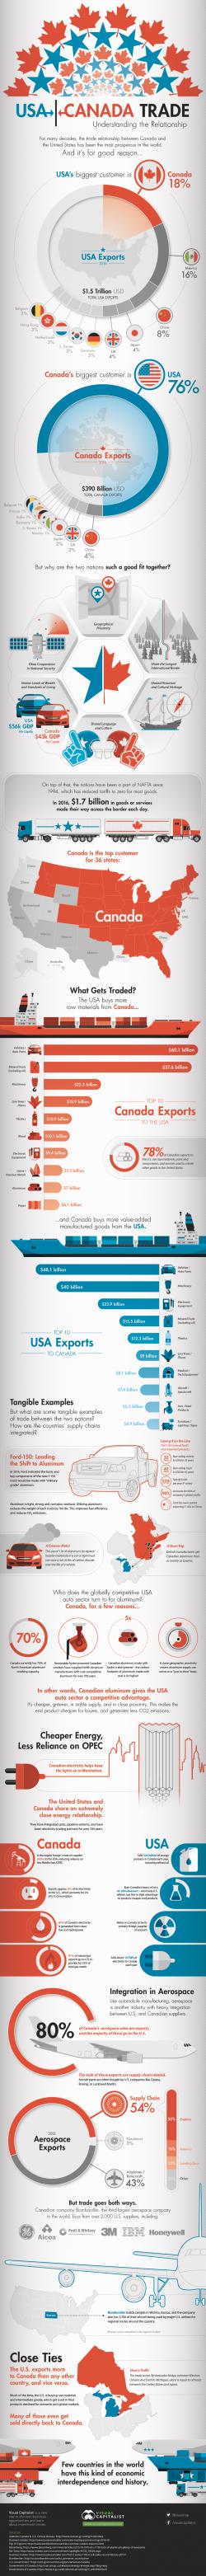 US Vs Canada: The Numbers Behind the World’s Closest Trade Relationship